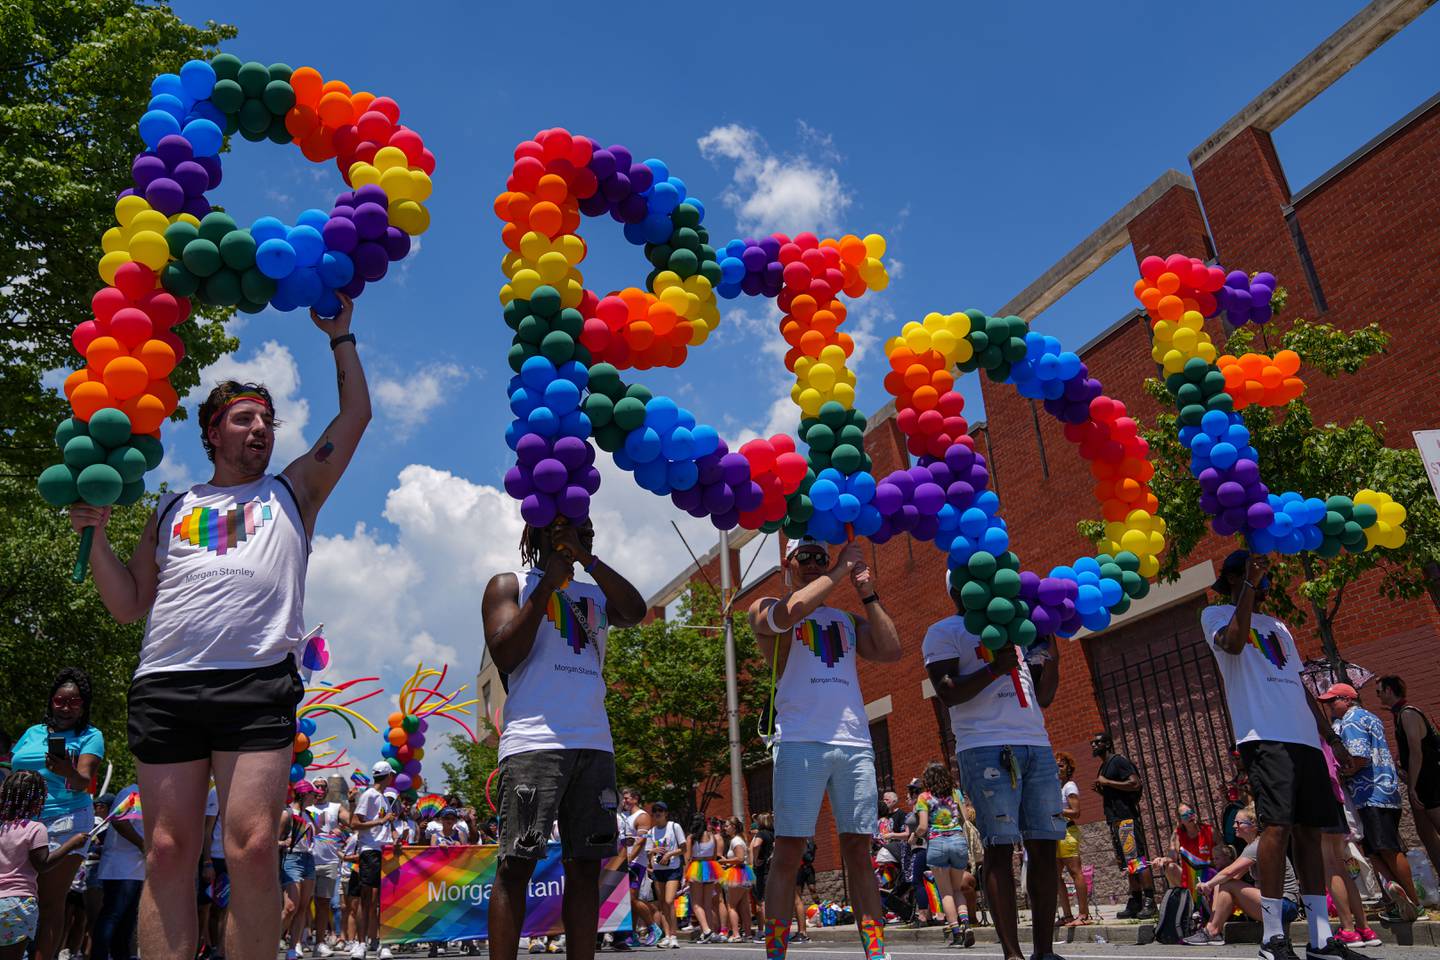 Baltimore Pride Week is more than just parties and a parade The